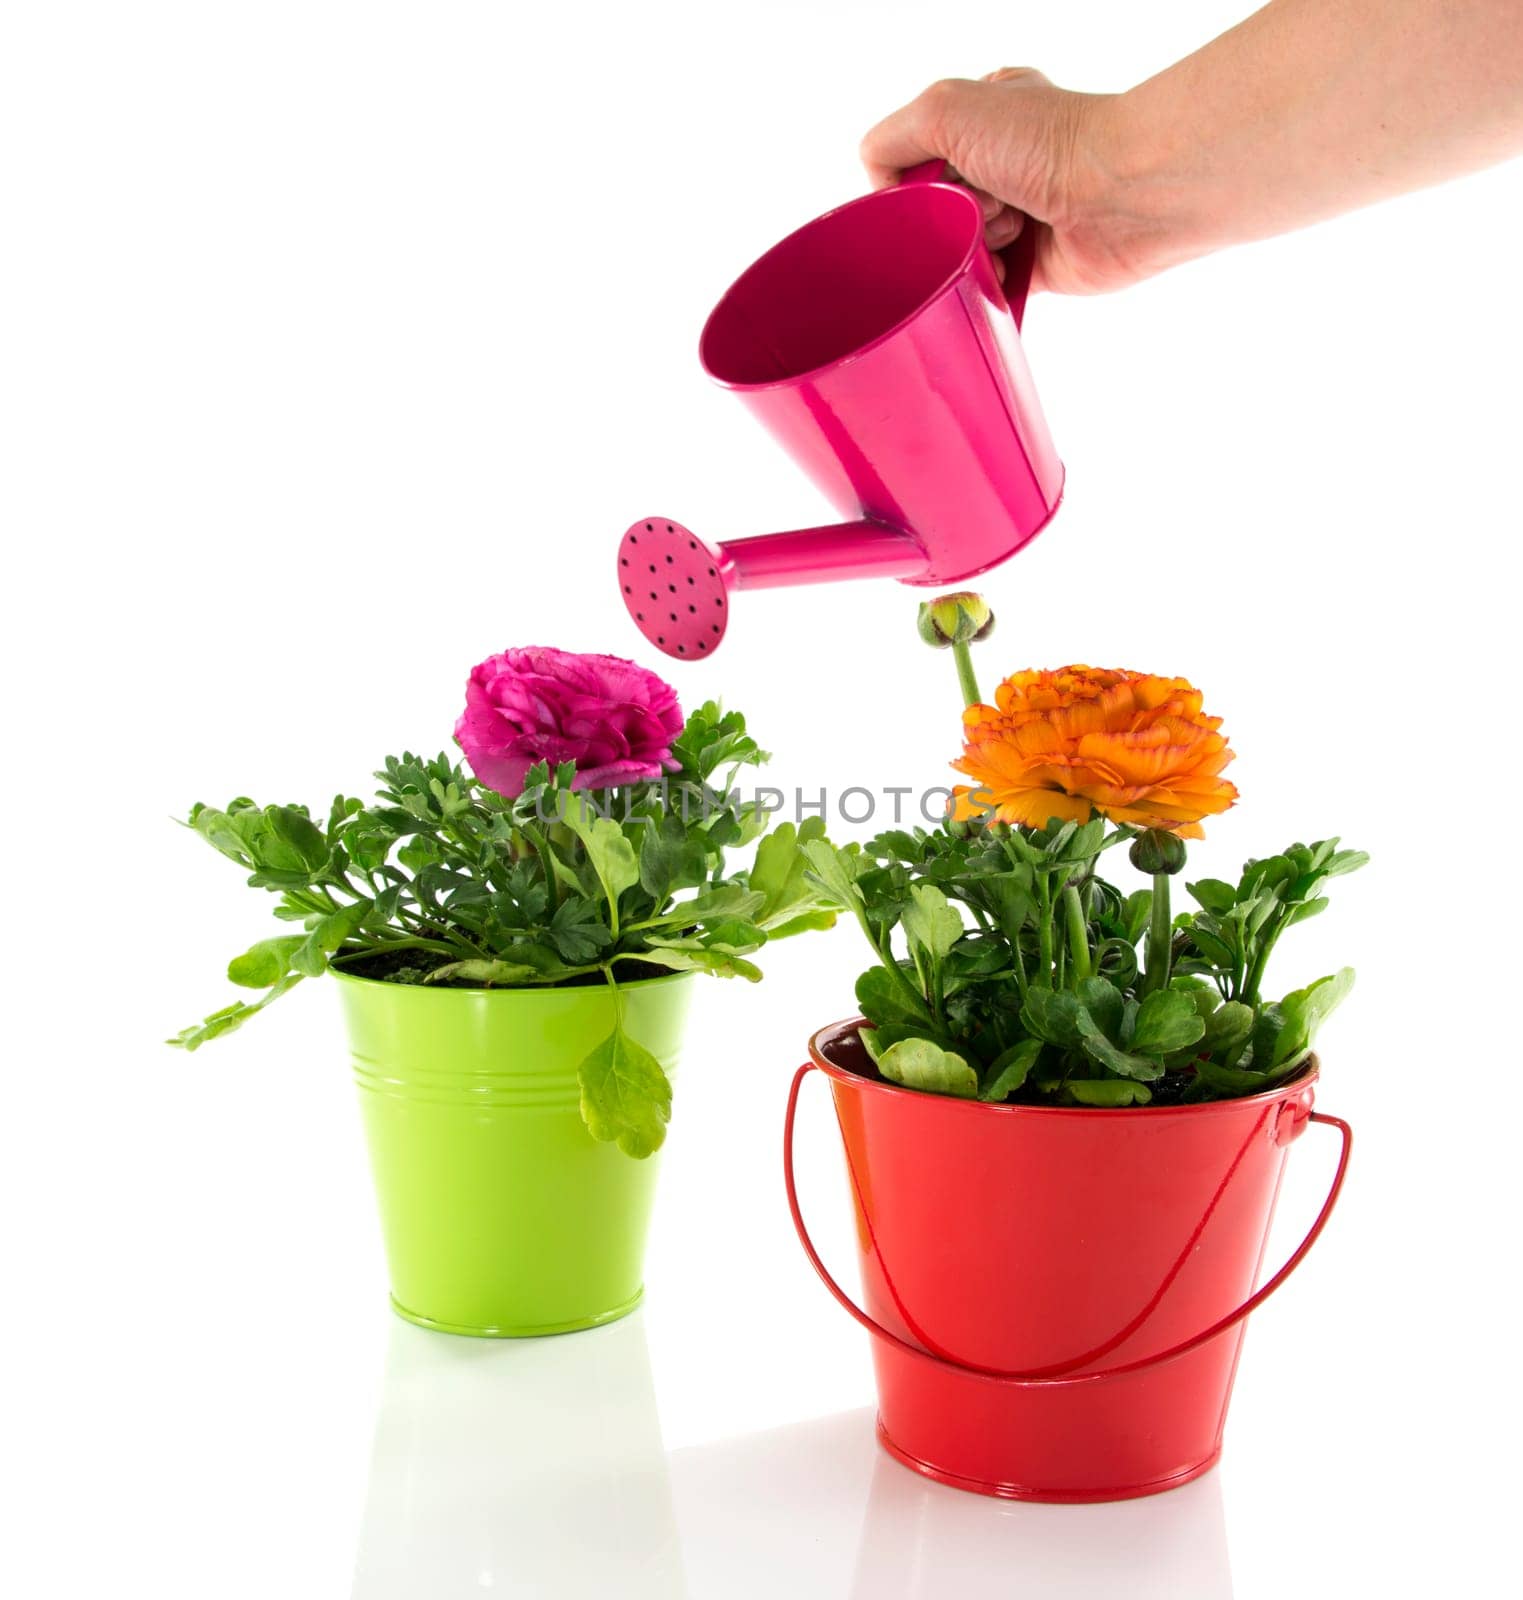 lady hand with watering can,red and green bucket with spring flowers and gardening tools